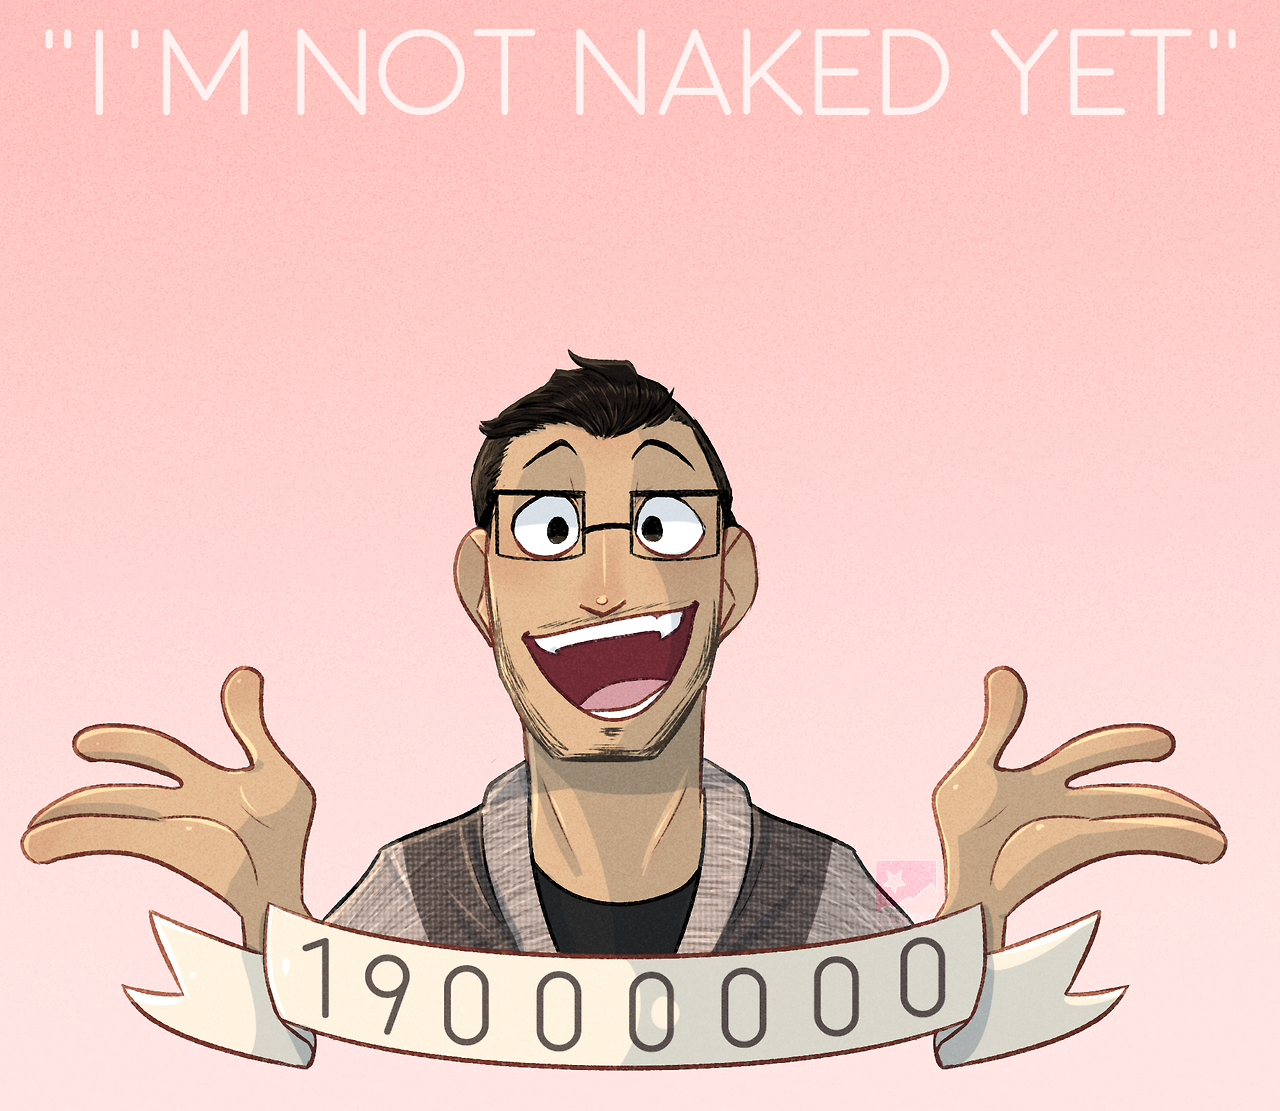 Nudes at a million subs